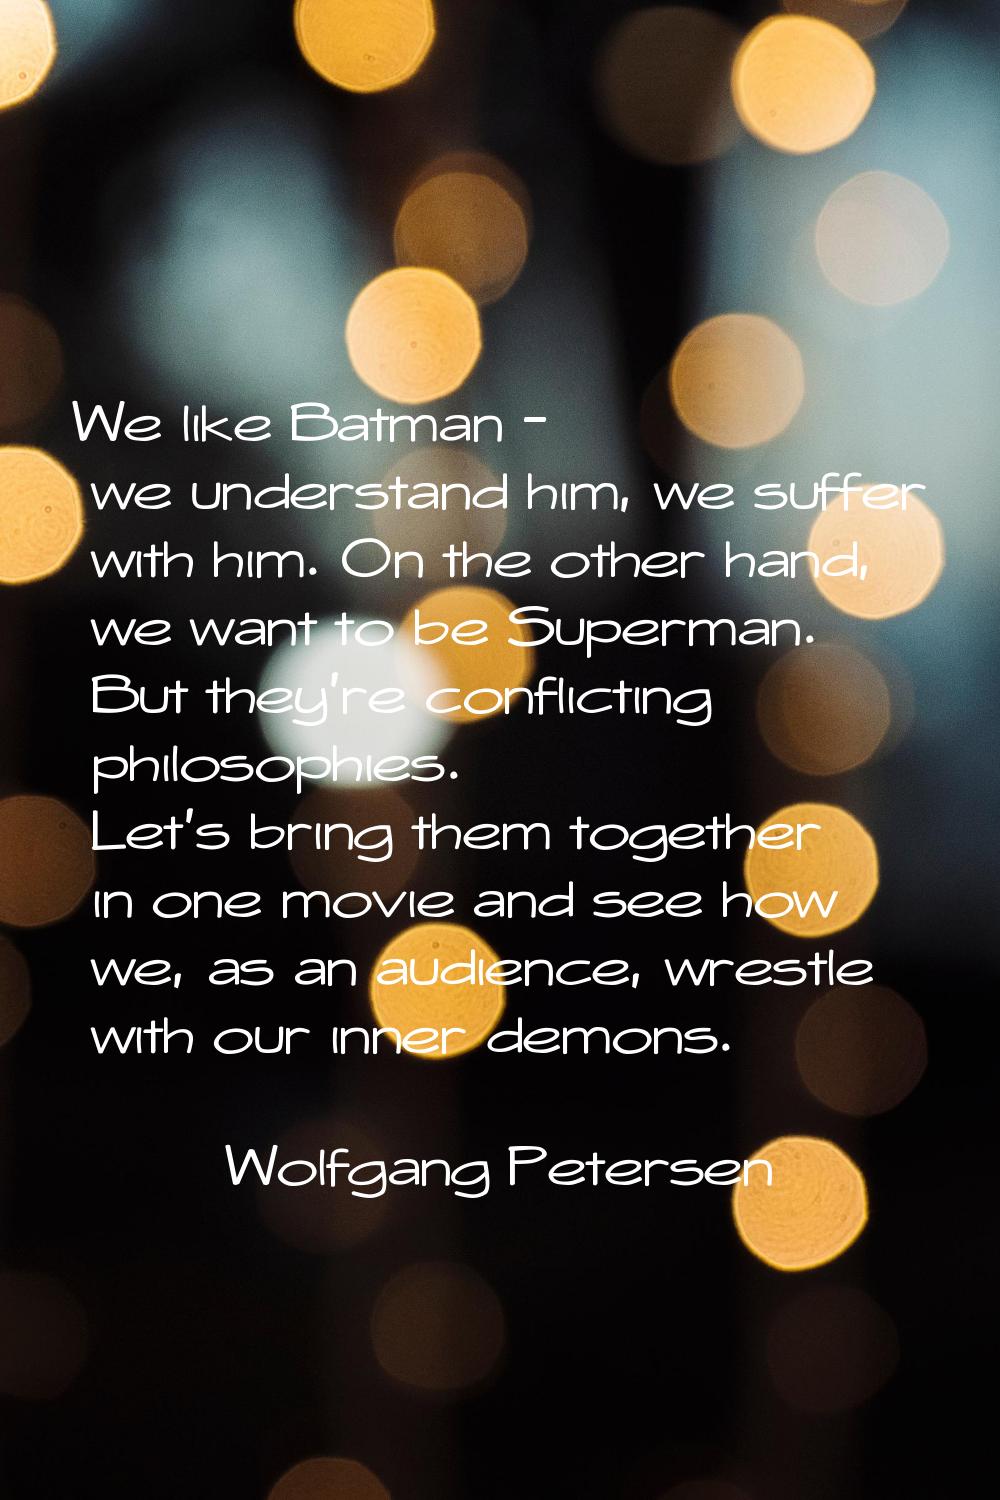 We like Batman - we understand him, we suffer with him. On the other hand, we want to be Superman. 